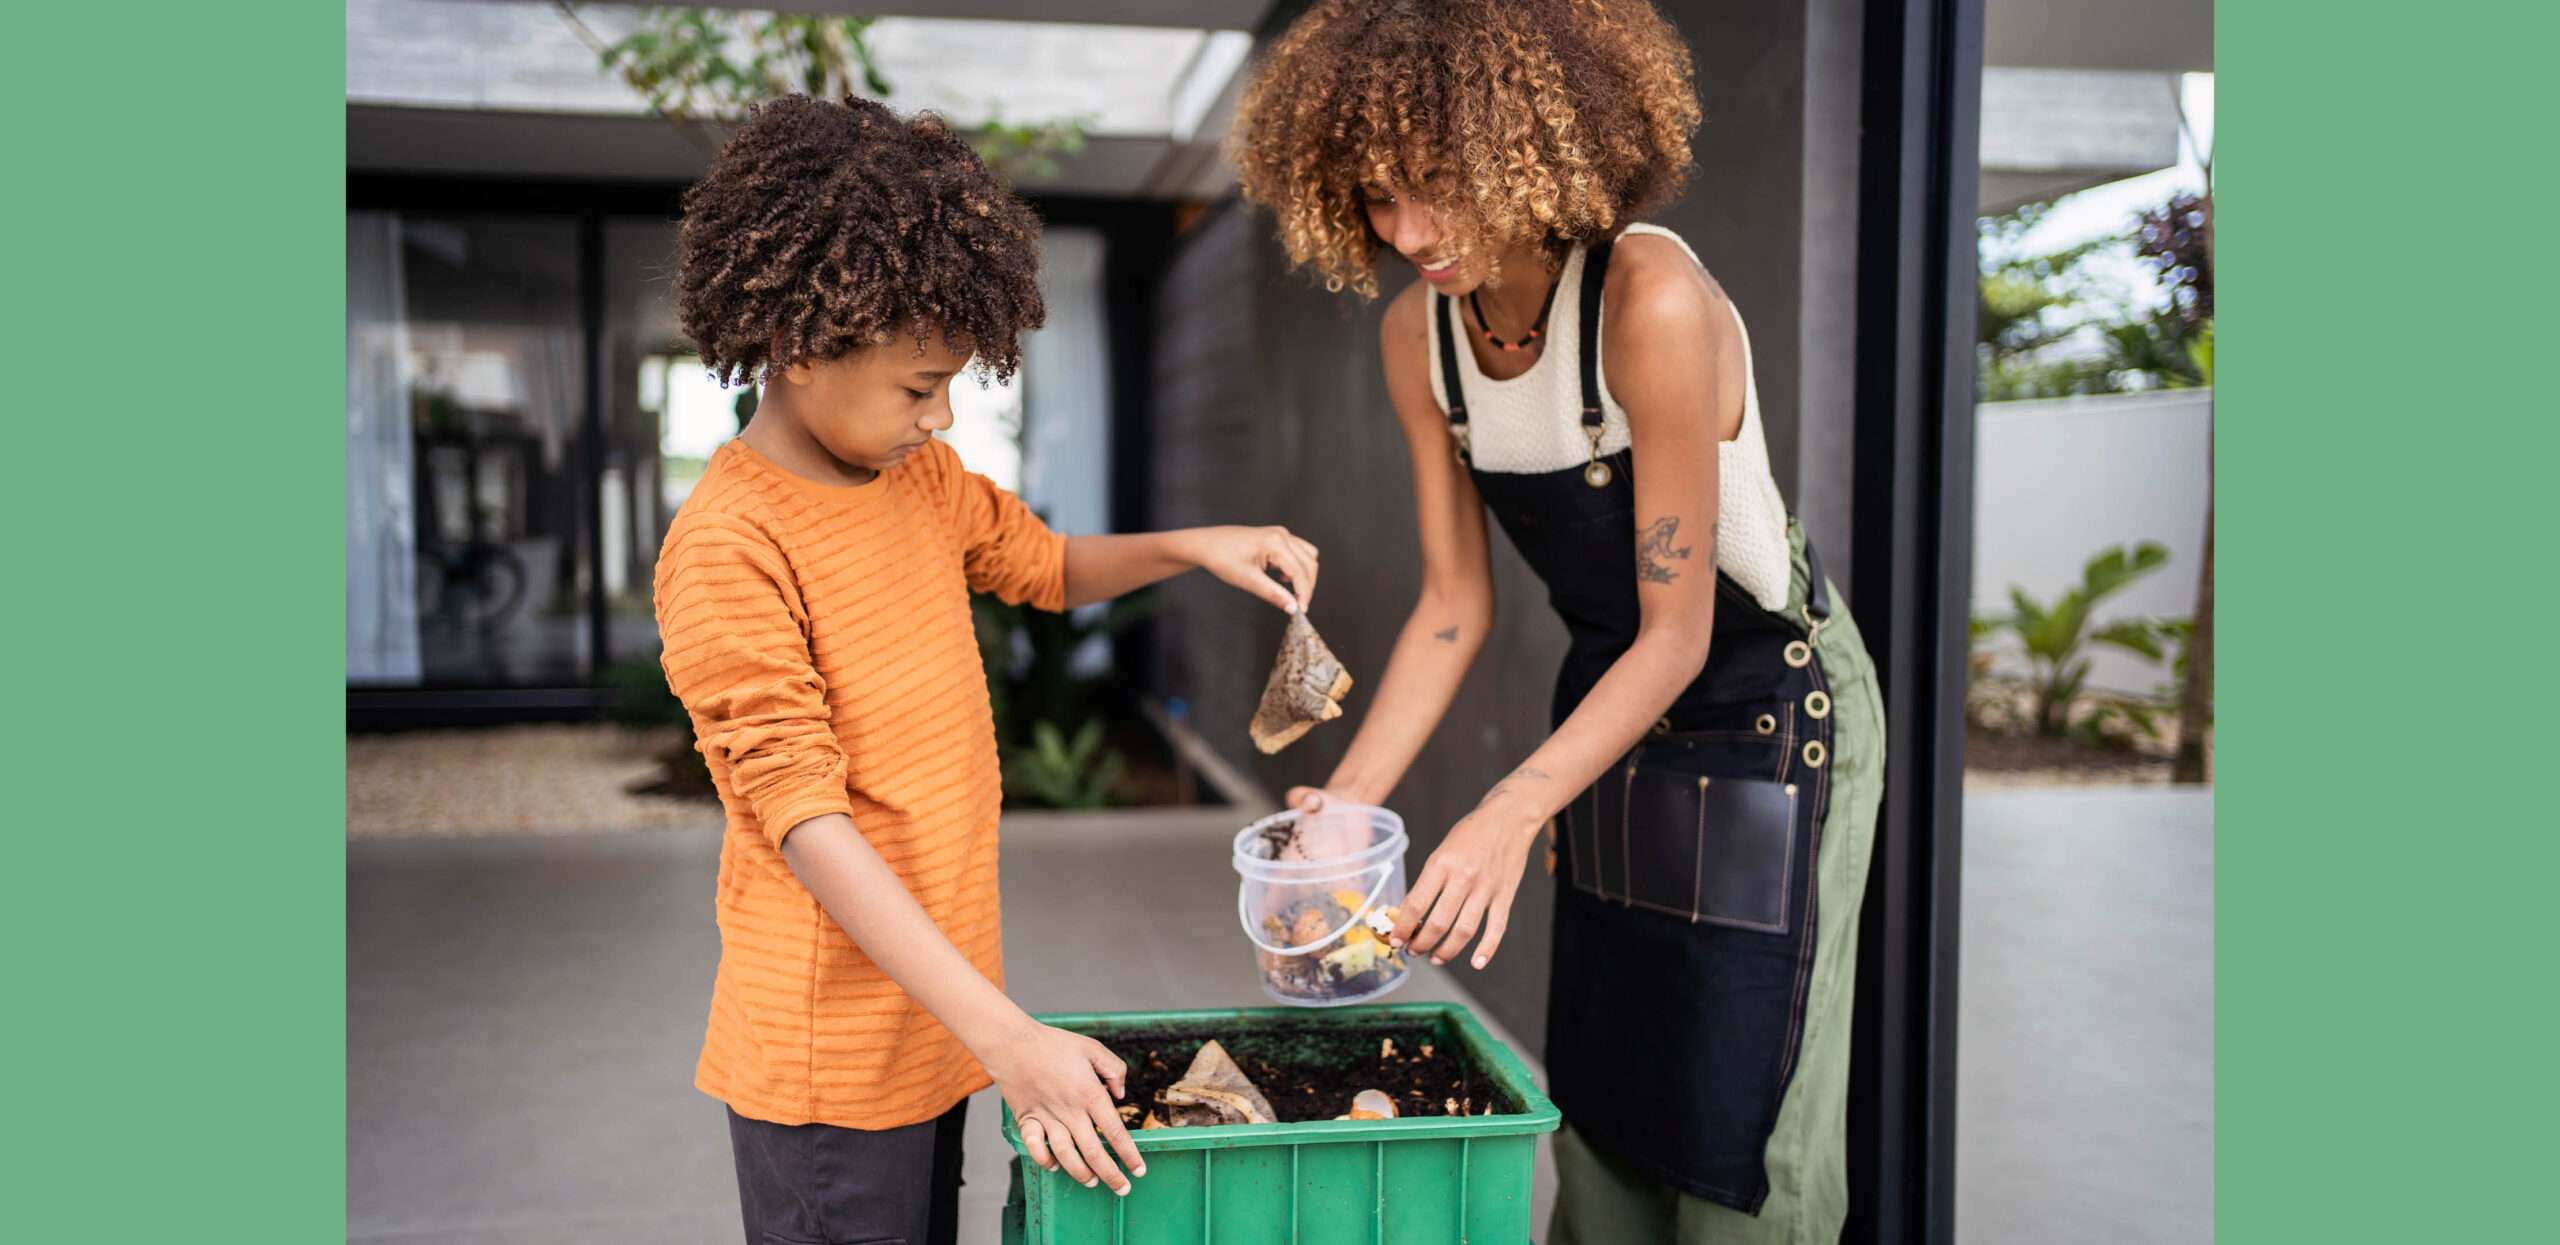 A young woman and male child adding food scraps to a compost bucket